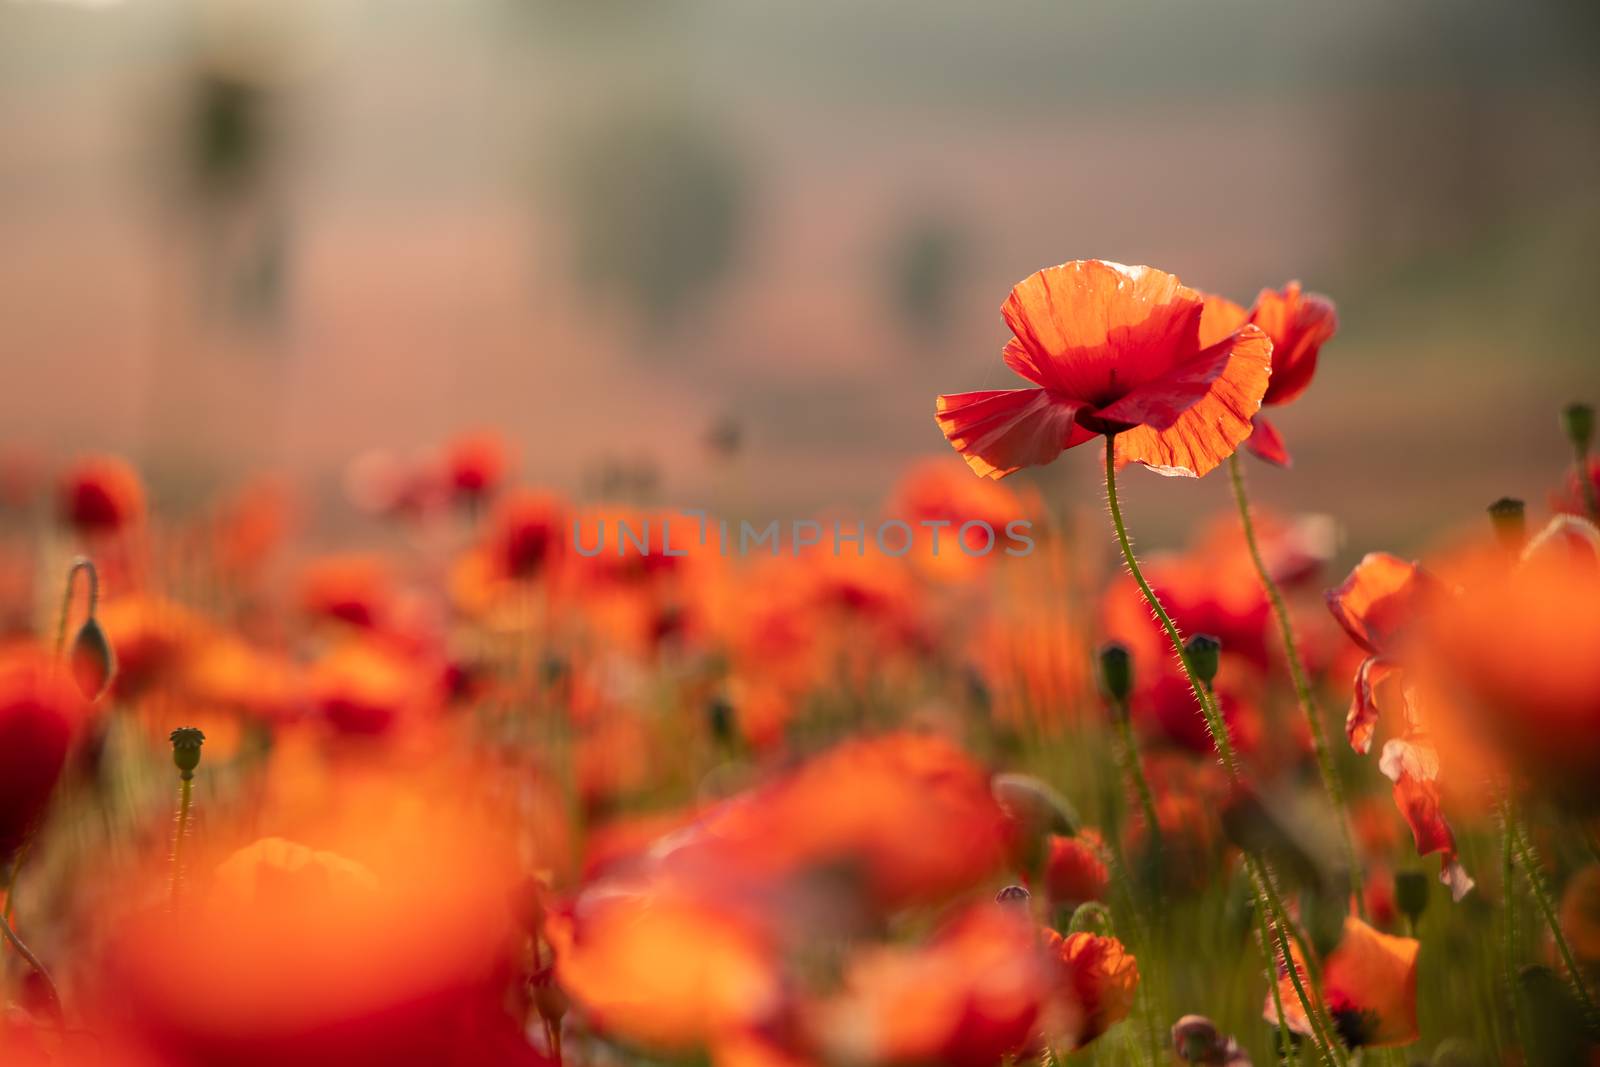 Close Up View of Poppy Flowers at Dawn Near Brewdley